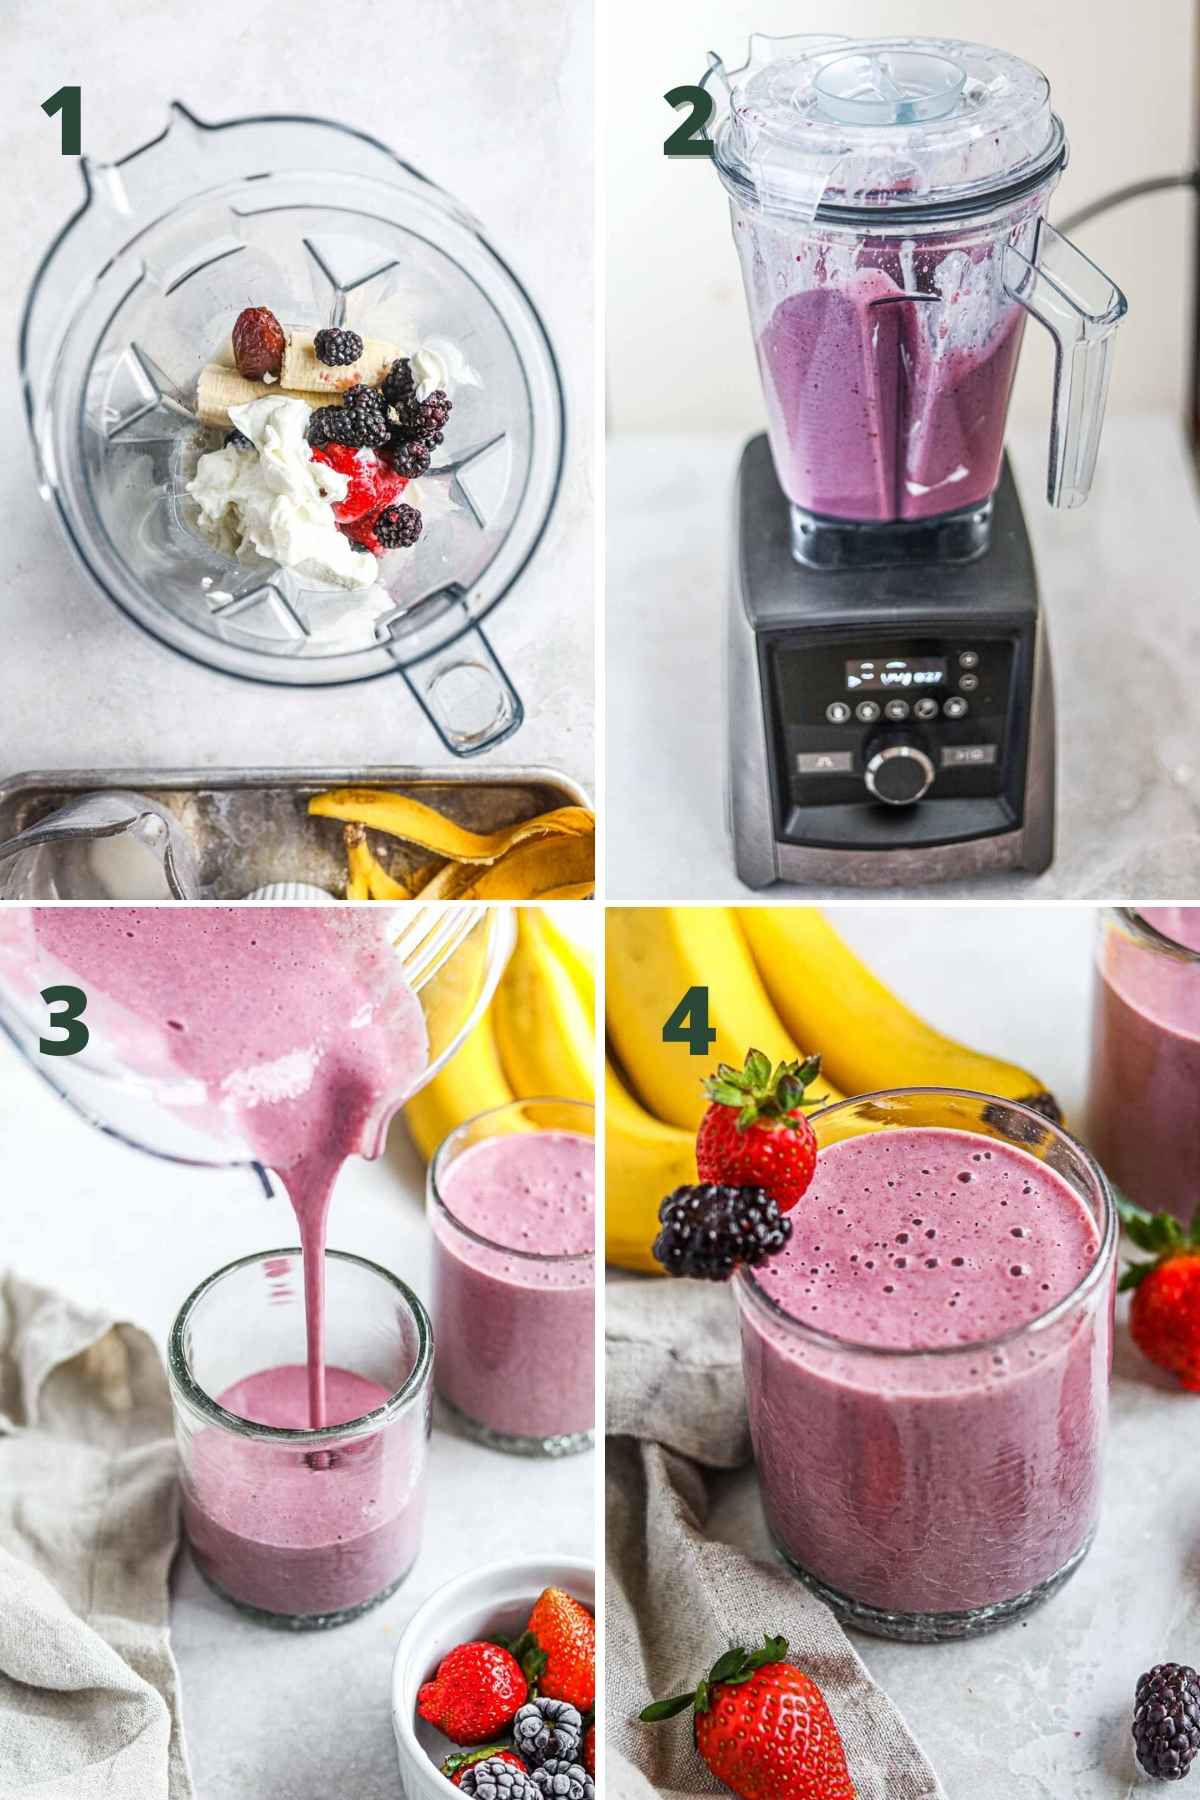 Steps to make blackberry strawberry banana smoothie, including adding the ingredients to a blender, blending on high, serving in glasses, and garnishing with berries.